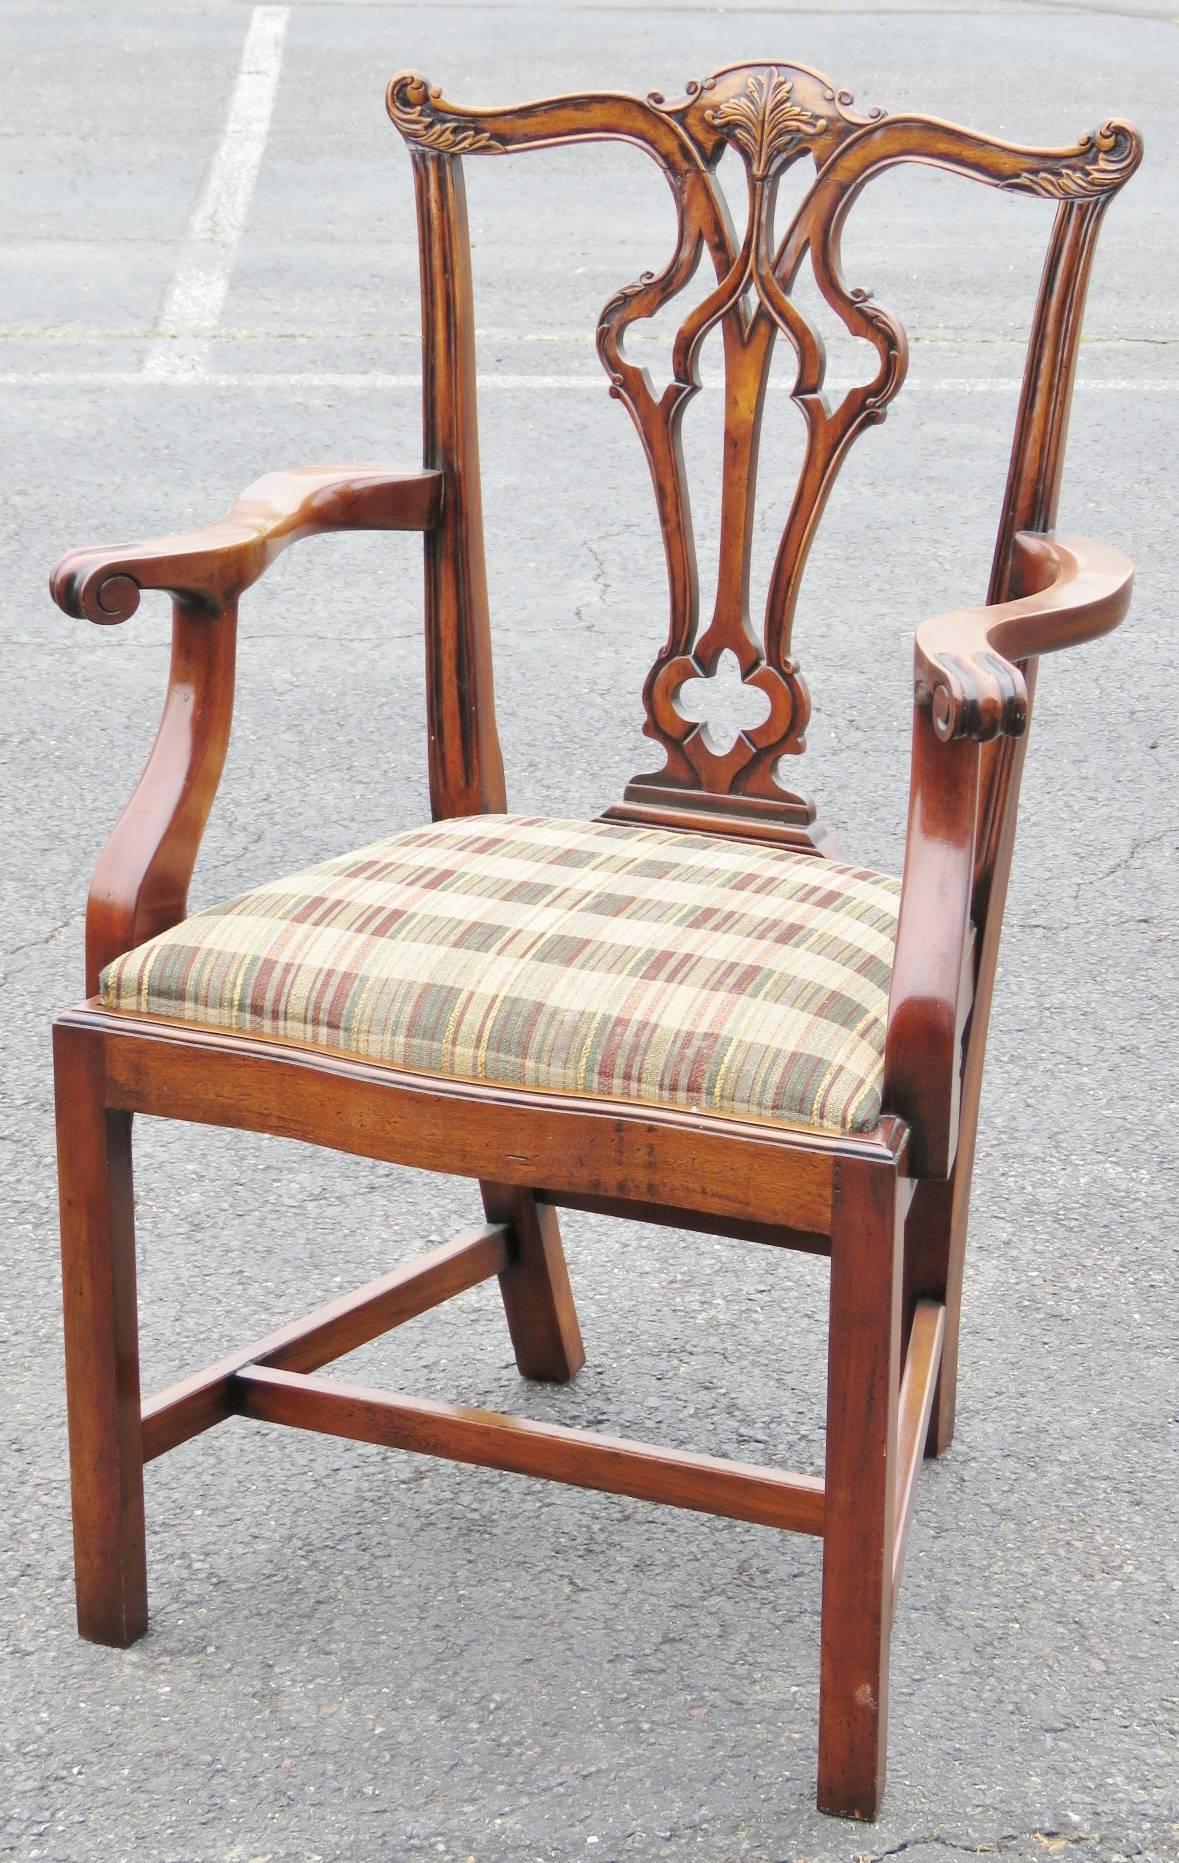 Carved frames. Striped upholstered seats. Set includes two armchairs and six side chairs.